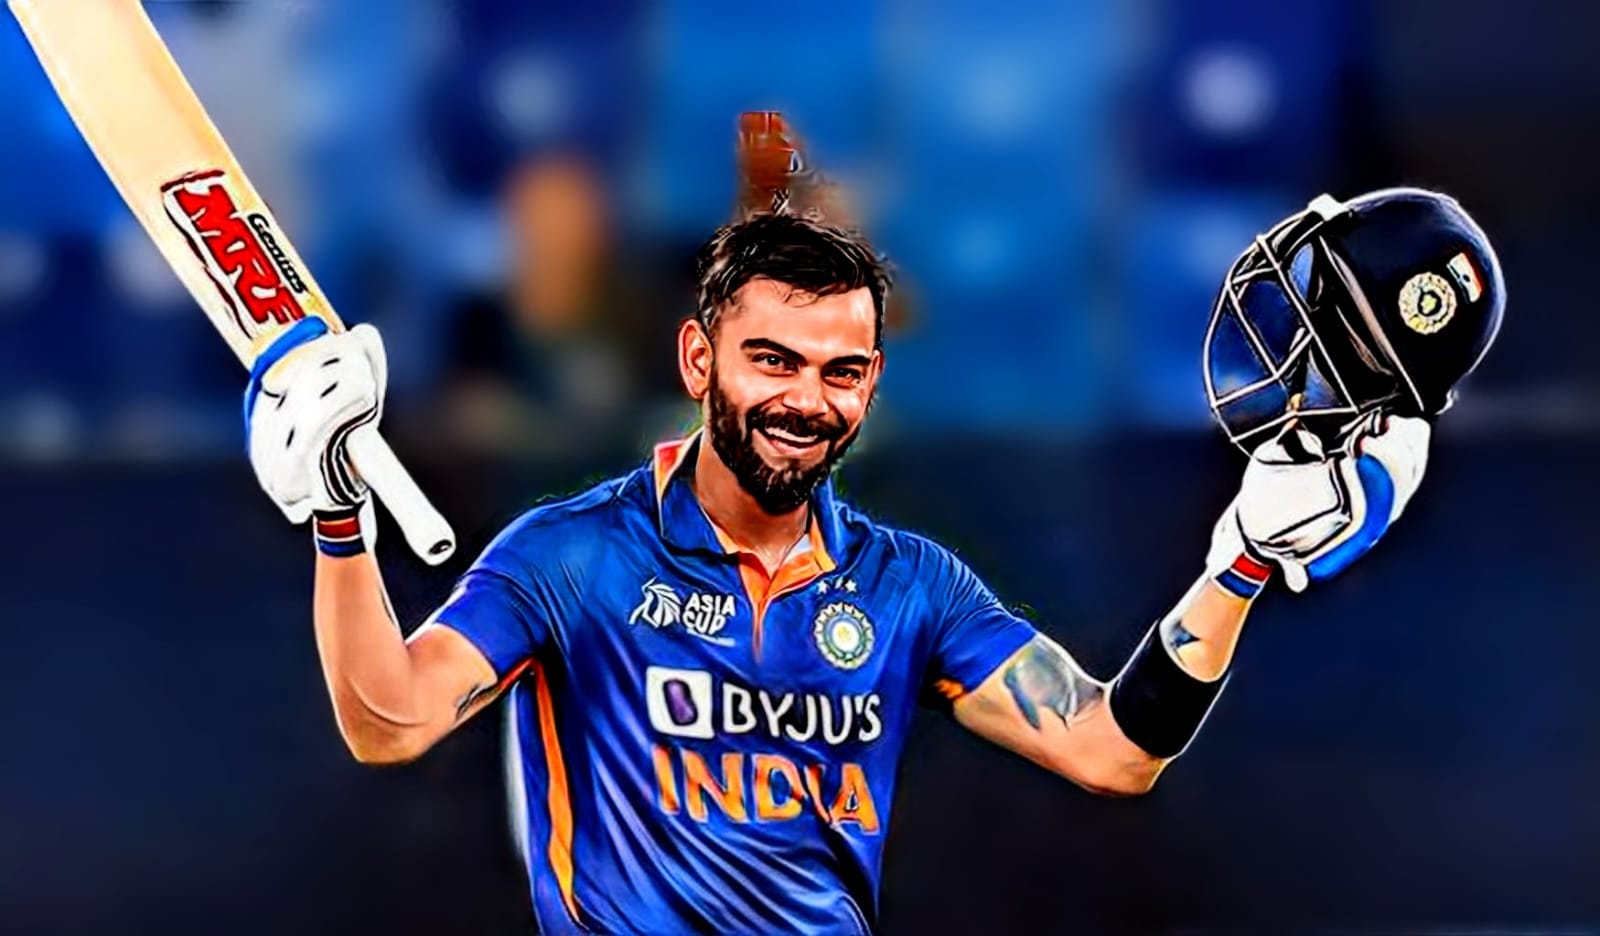 Virat Kohli Net Worth, Age, Wife, Height, Weight with All Latest Updates